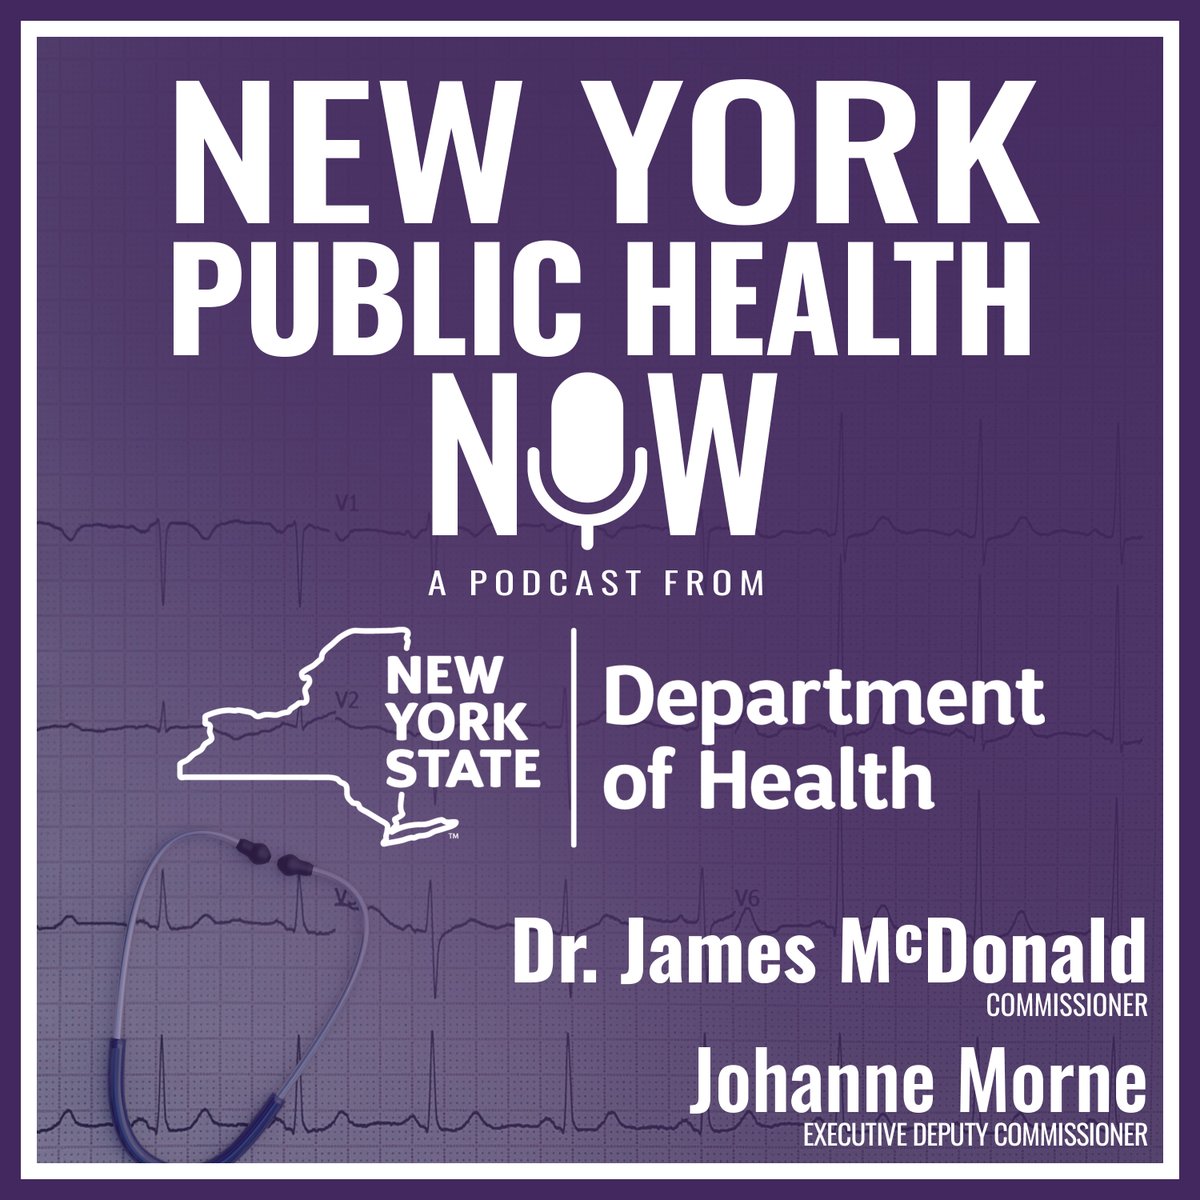 Our latest episode centers on diversity among medical professionals, with medical student Sabrina Dunn from the University of Buffalo’s Jacobs School of Medicine and Biomedical Sciences. Listen on your favorite podcast platform or online: health.ny.gov/commissioner/p…